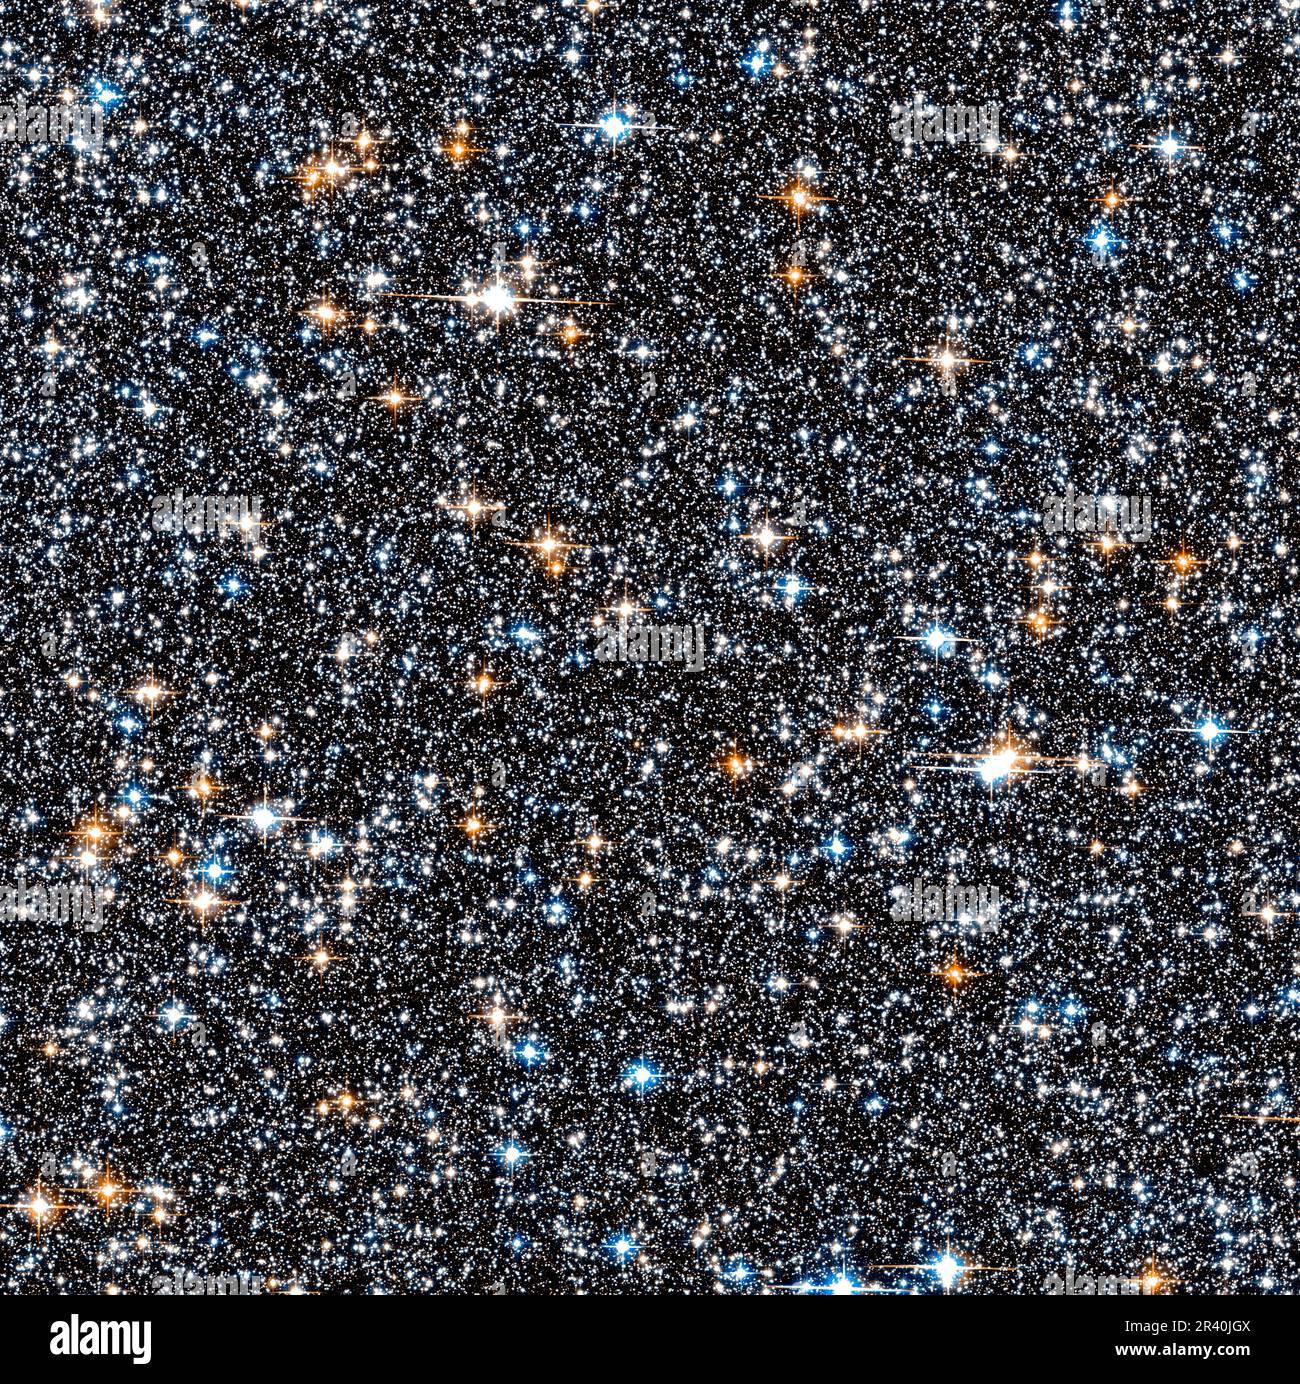 Small section of the dense collection of stars crammed together in the Milky Way's galactic bulge. Stock Photo